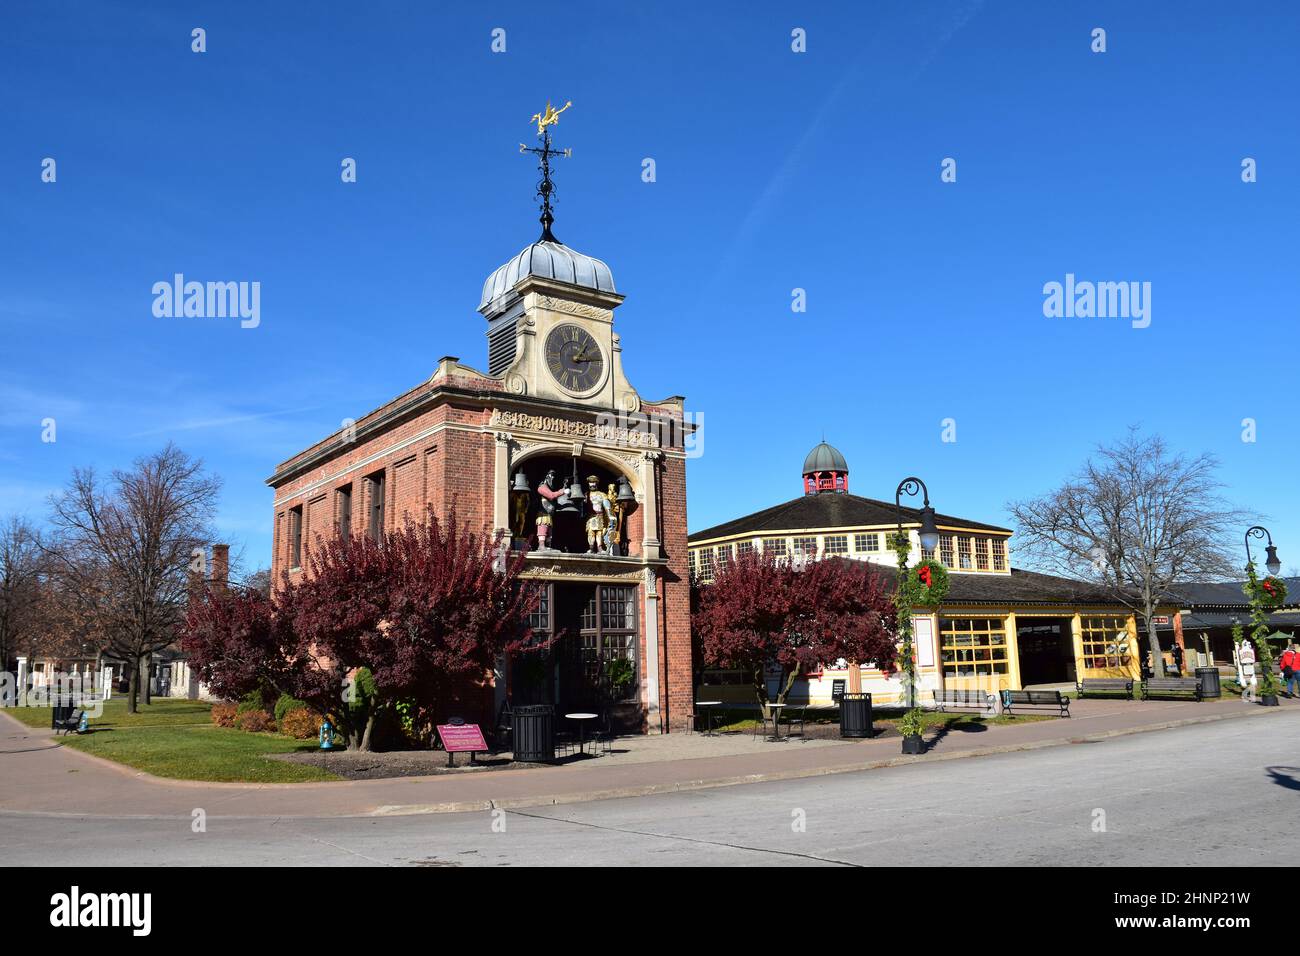 Sir John Bennett's jewelry store at Greenfield Village, an 80-acre open air site & part of the Henry Ford museum complex in Dearborn, Michigan, USA. Stock Photo